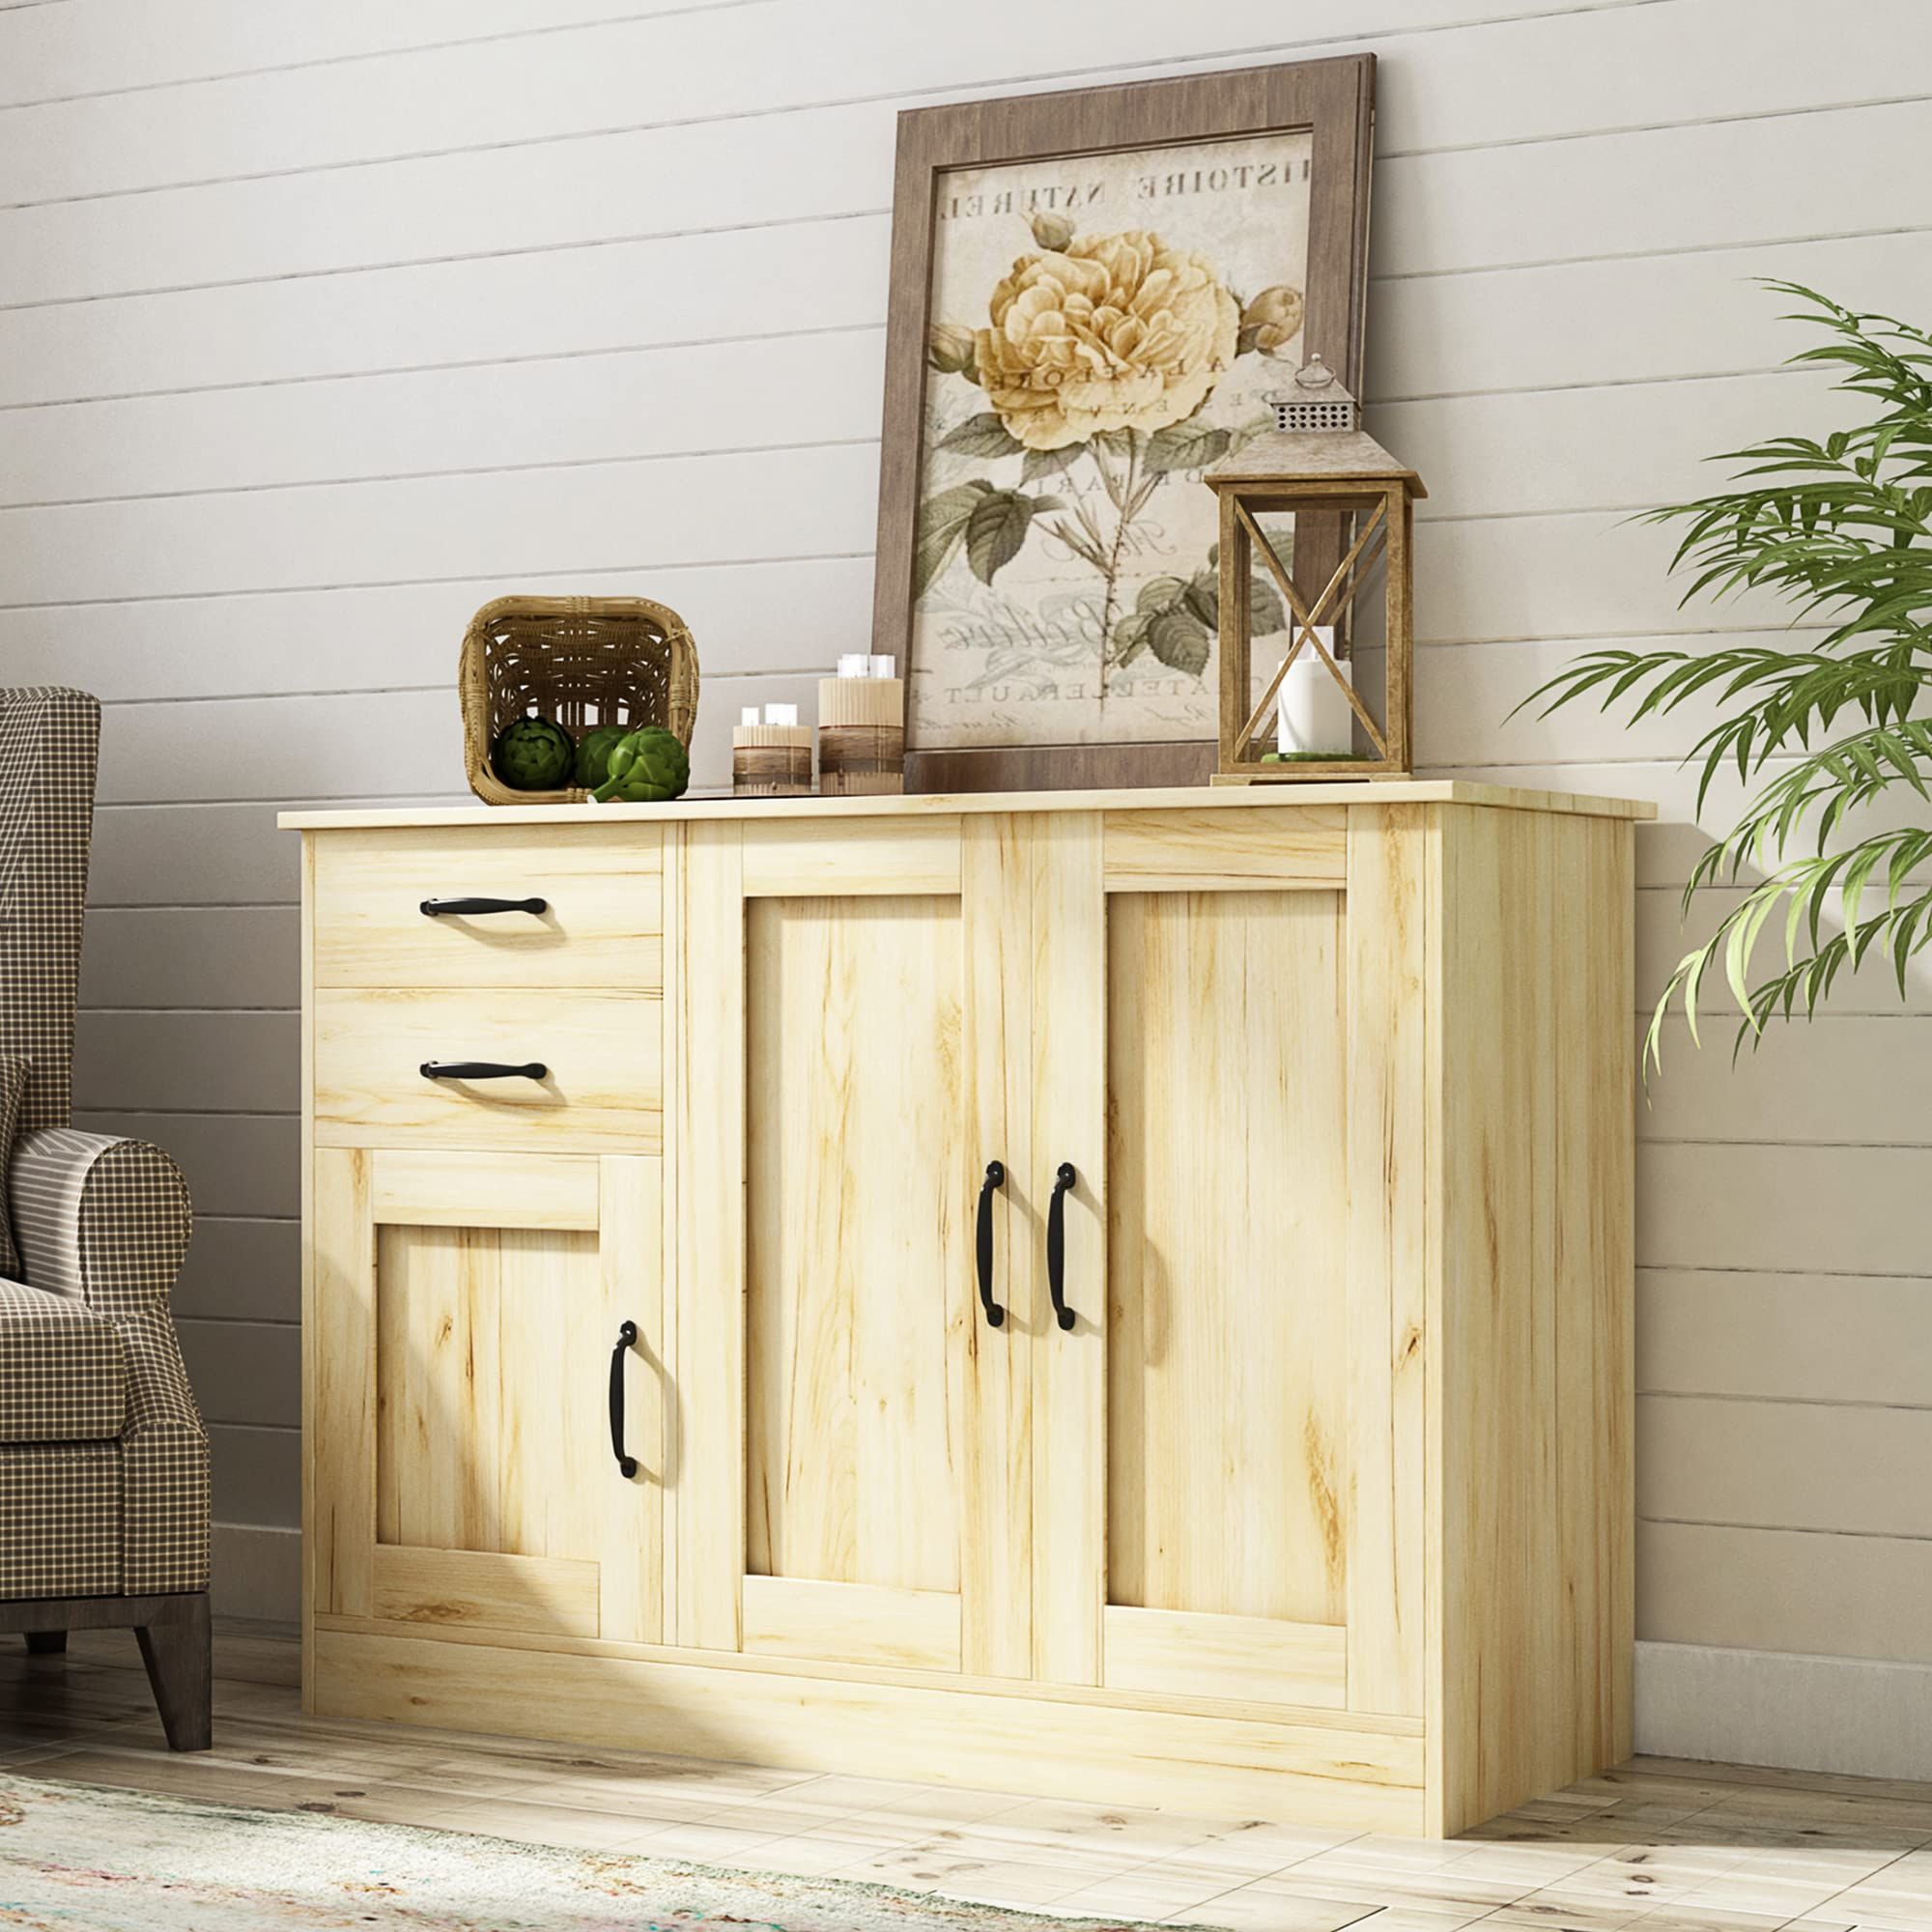 Sideboard Storage Cabinet With 3 Drawers & 3 Doors Regarding Most Recent Amazon – Joysource 43 Inch Sideboard Buffet Cabinet 3 Doors Sideboard  Coffee Bar Cabinet With 2 Drawers Cupboard Cabinet With Adjustable Shelf  For Living Room Kitchen Bedroom, Oak – Buffets & Sideboards (View 9 of 10)